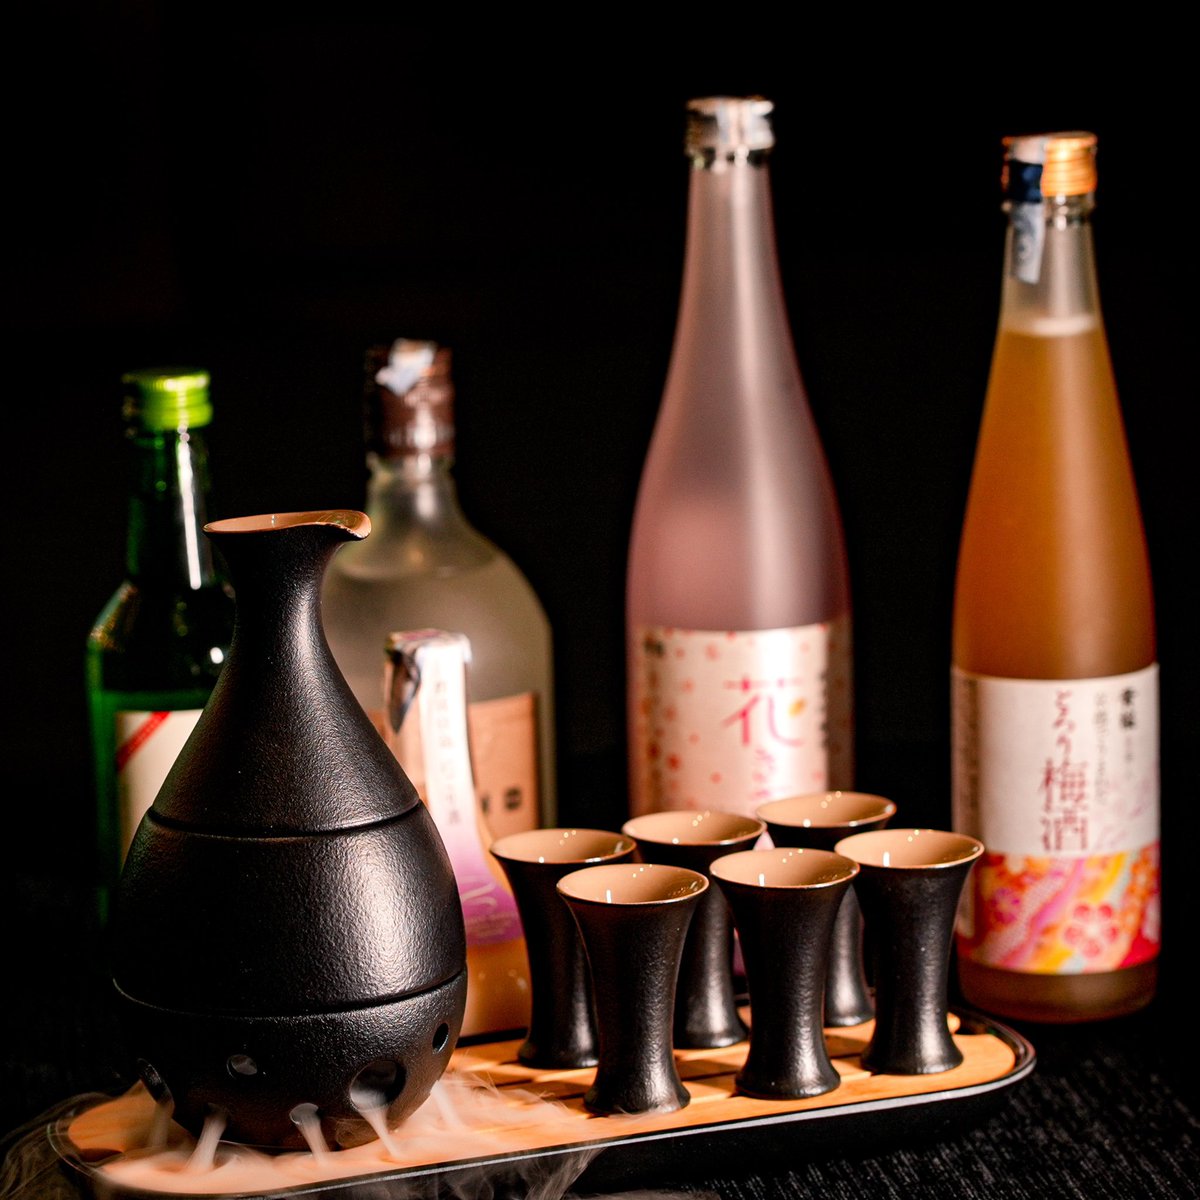 𝑻𝒓𝒊𝒄𝒌𝒔 𝒃𝒆𝒇𝒐𝒓𝒆 𝒔𝒊𝒑𝒔.

Spin it, swirl it or serve it directly - there’s many ways to crack open a bottle of #Soju! #WhenInSeoul, turn authentic Korean curations into a feast of memories.

For reservations, please contact:
+91 88844 28234 | +91 96115 28693